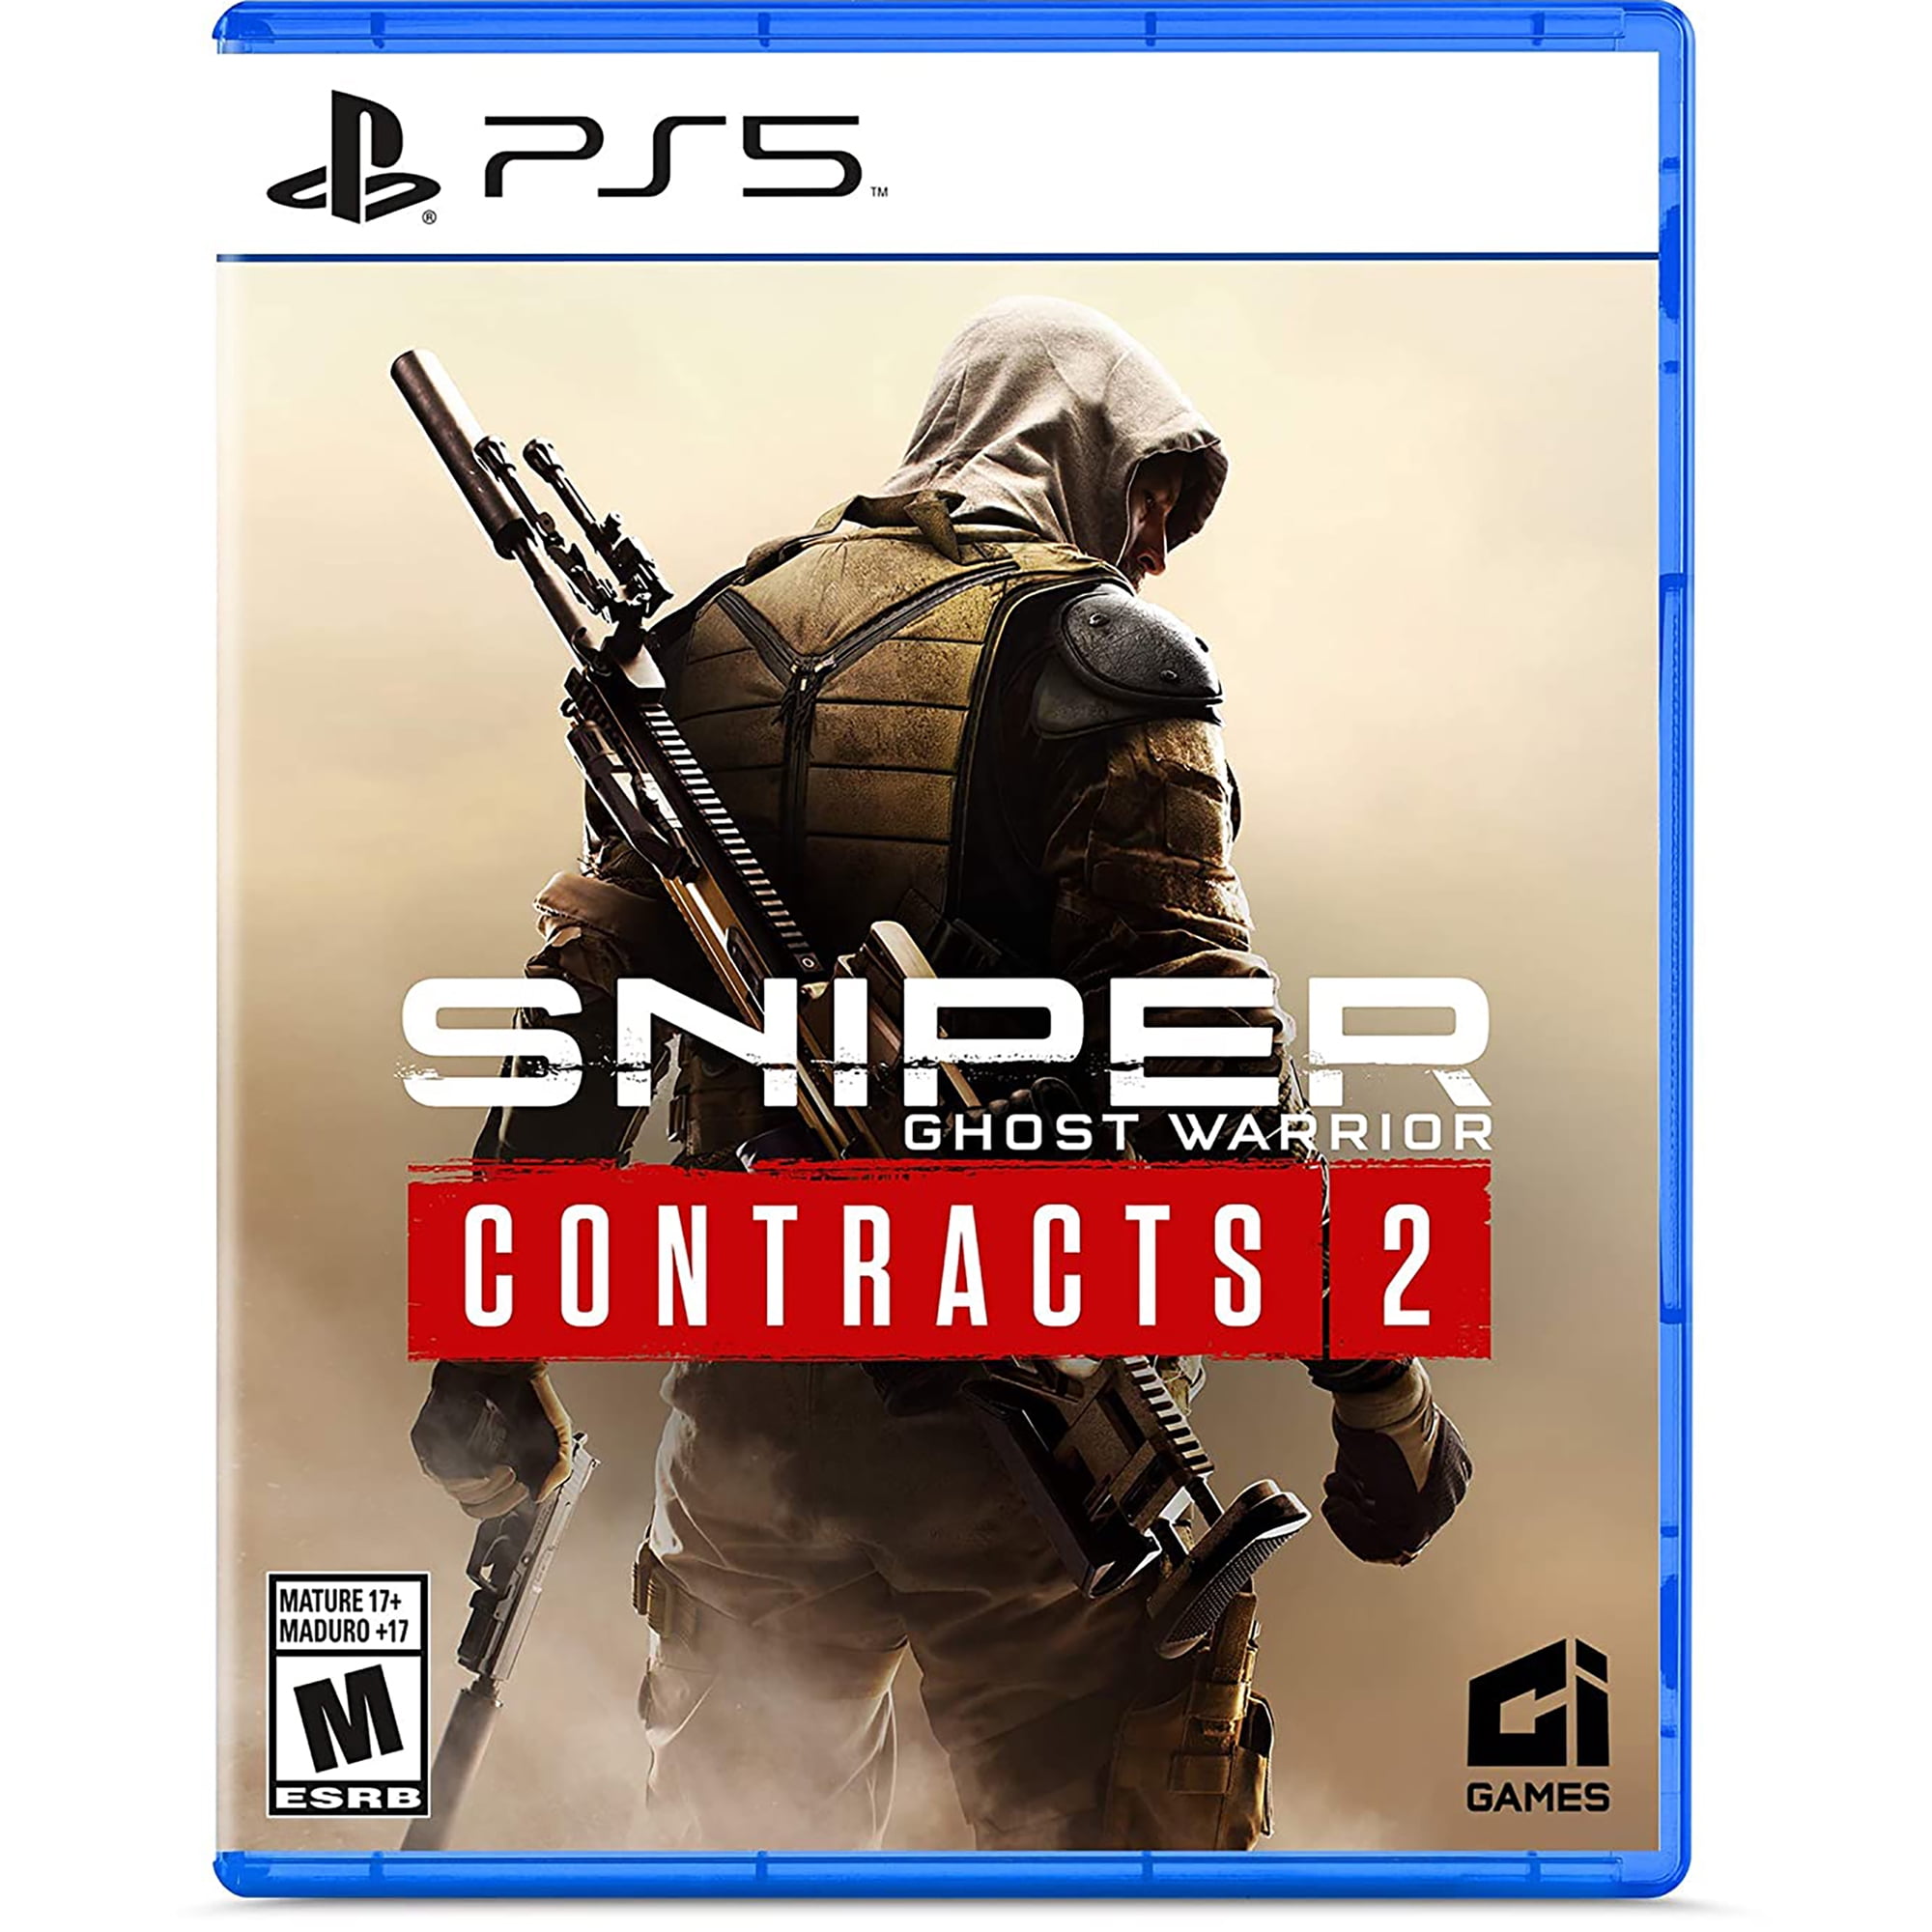 Picture of City Interactive 816293018000 Sniper Ghost Contracts 2 for Play Station 5 Game